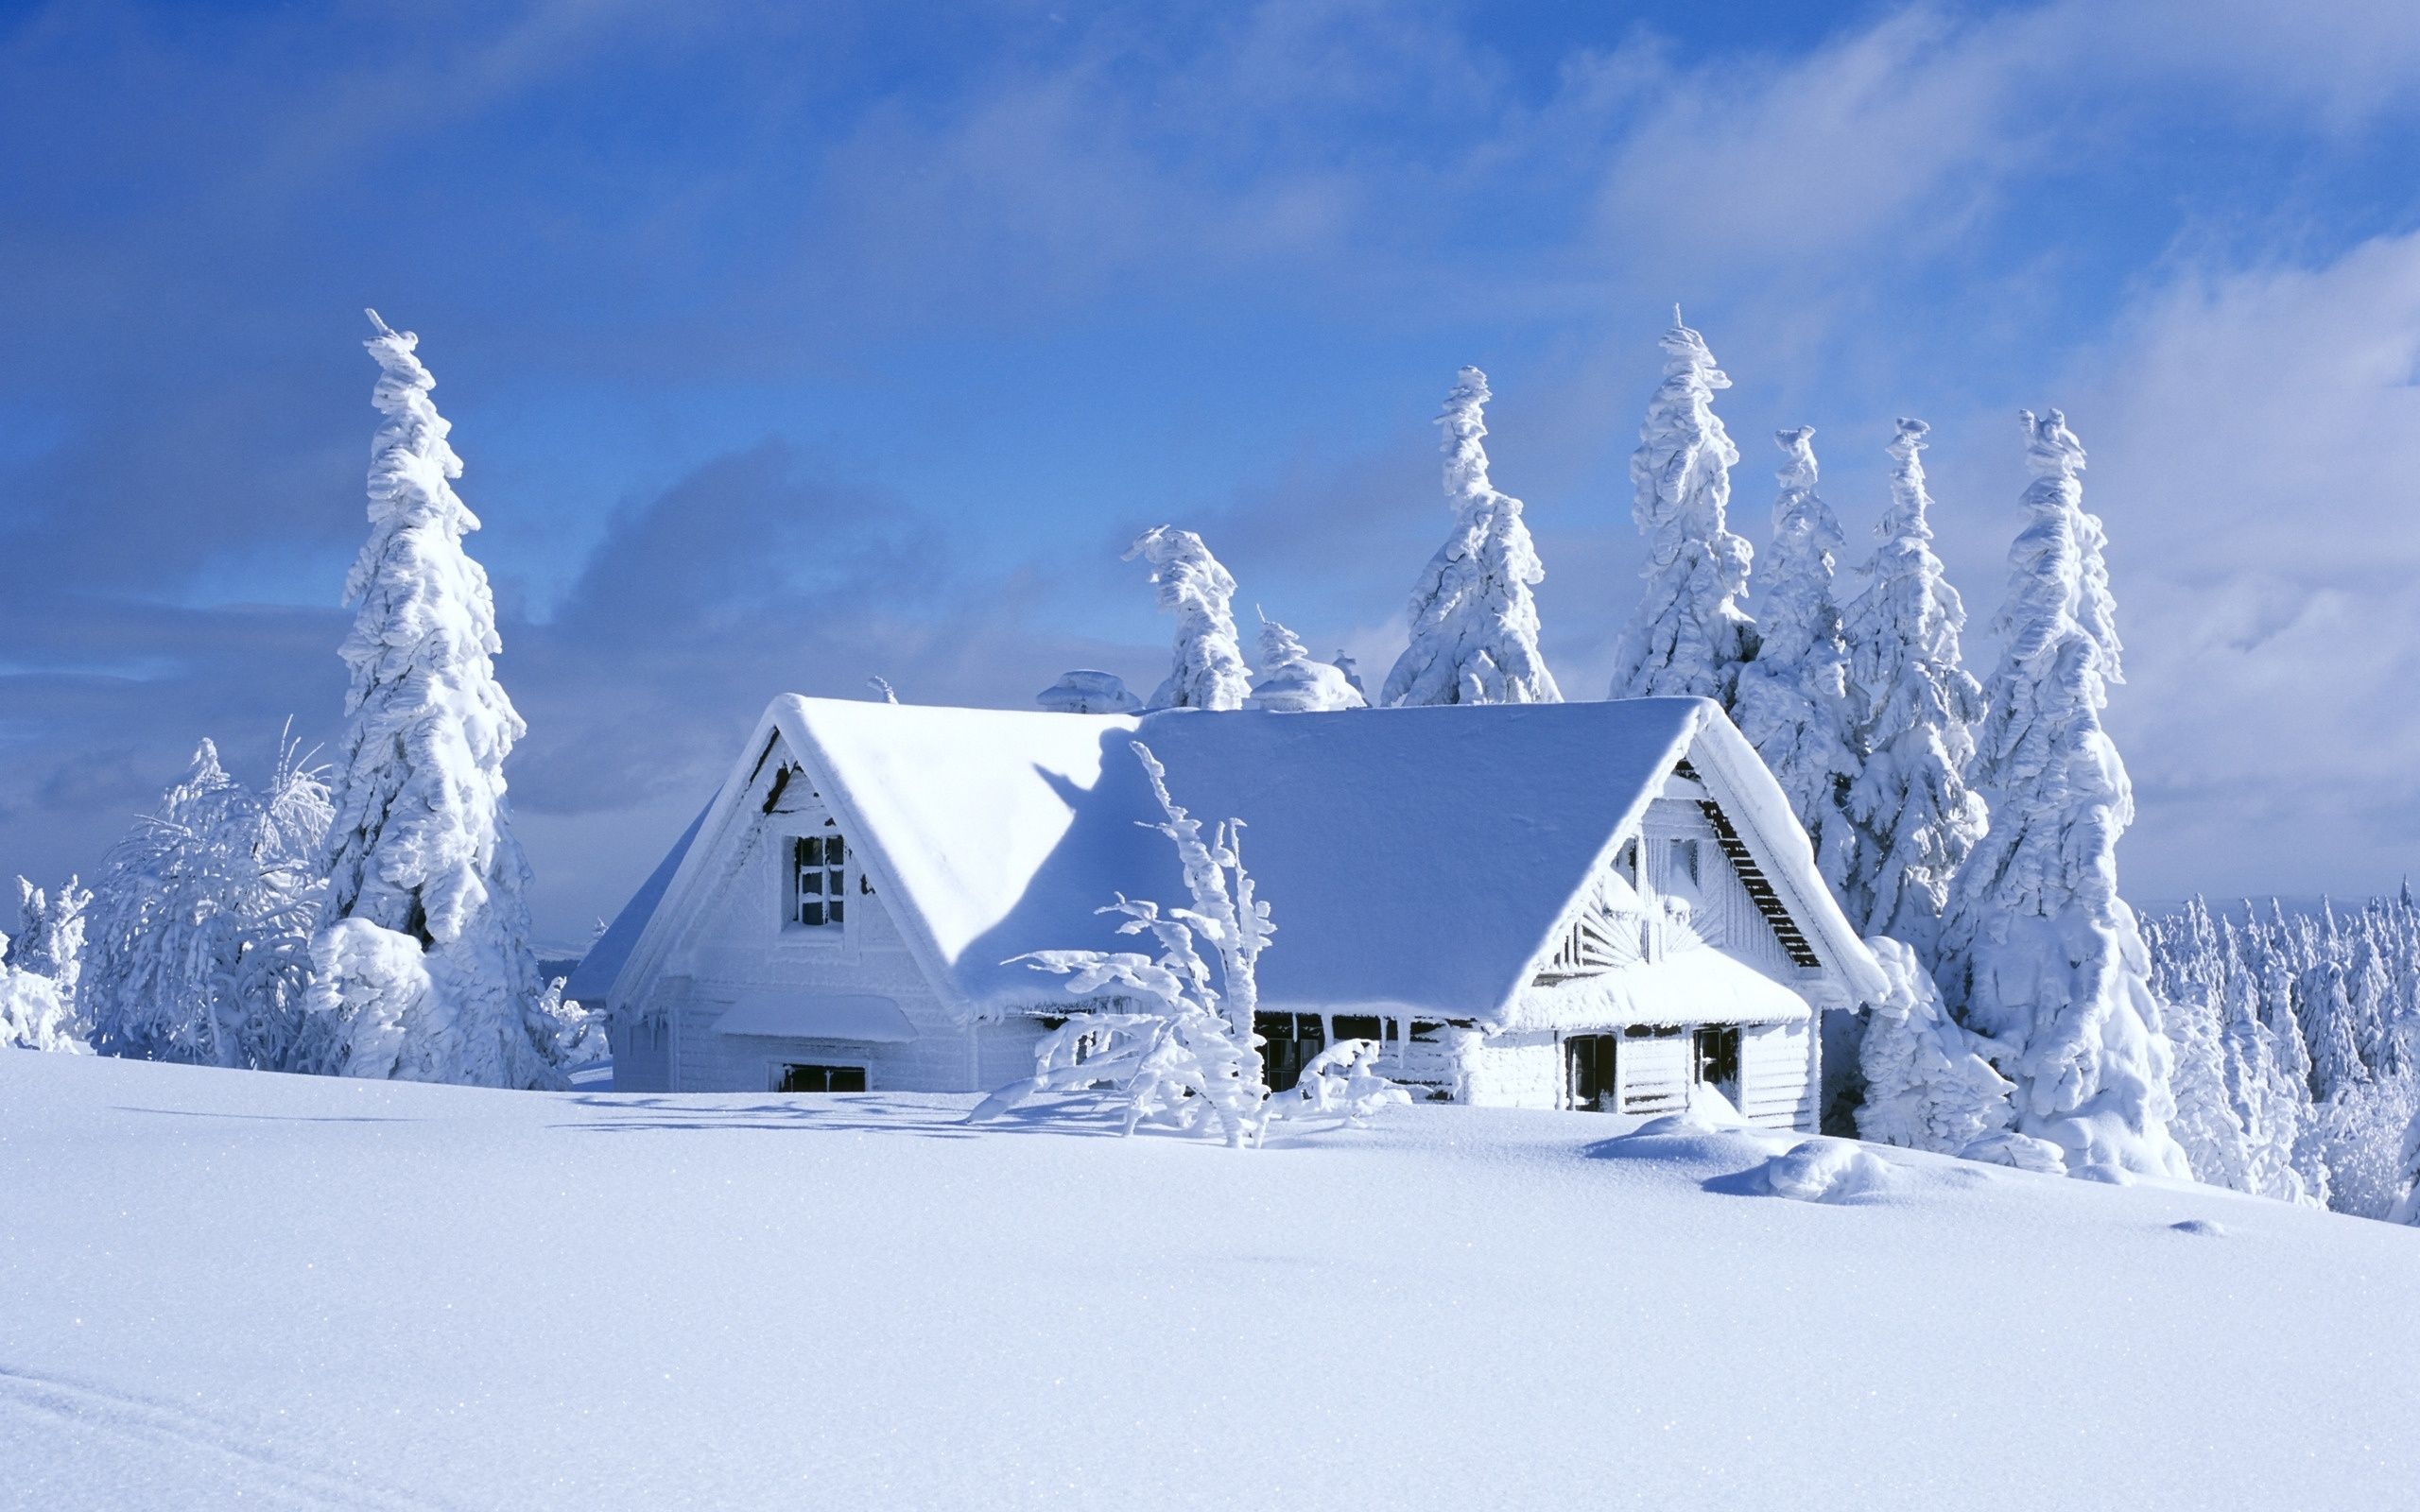 Snowy Houses Wallpaper Free Snowy Houses Background